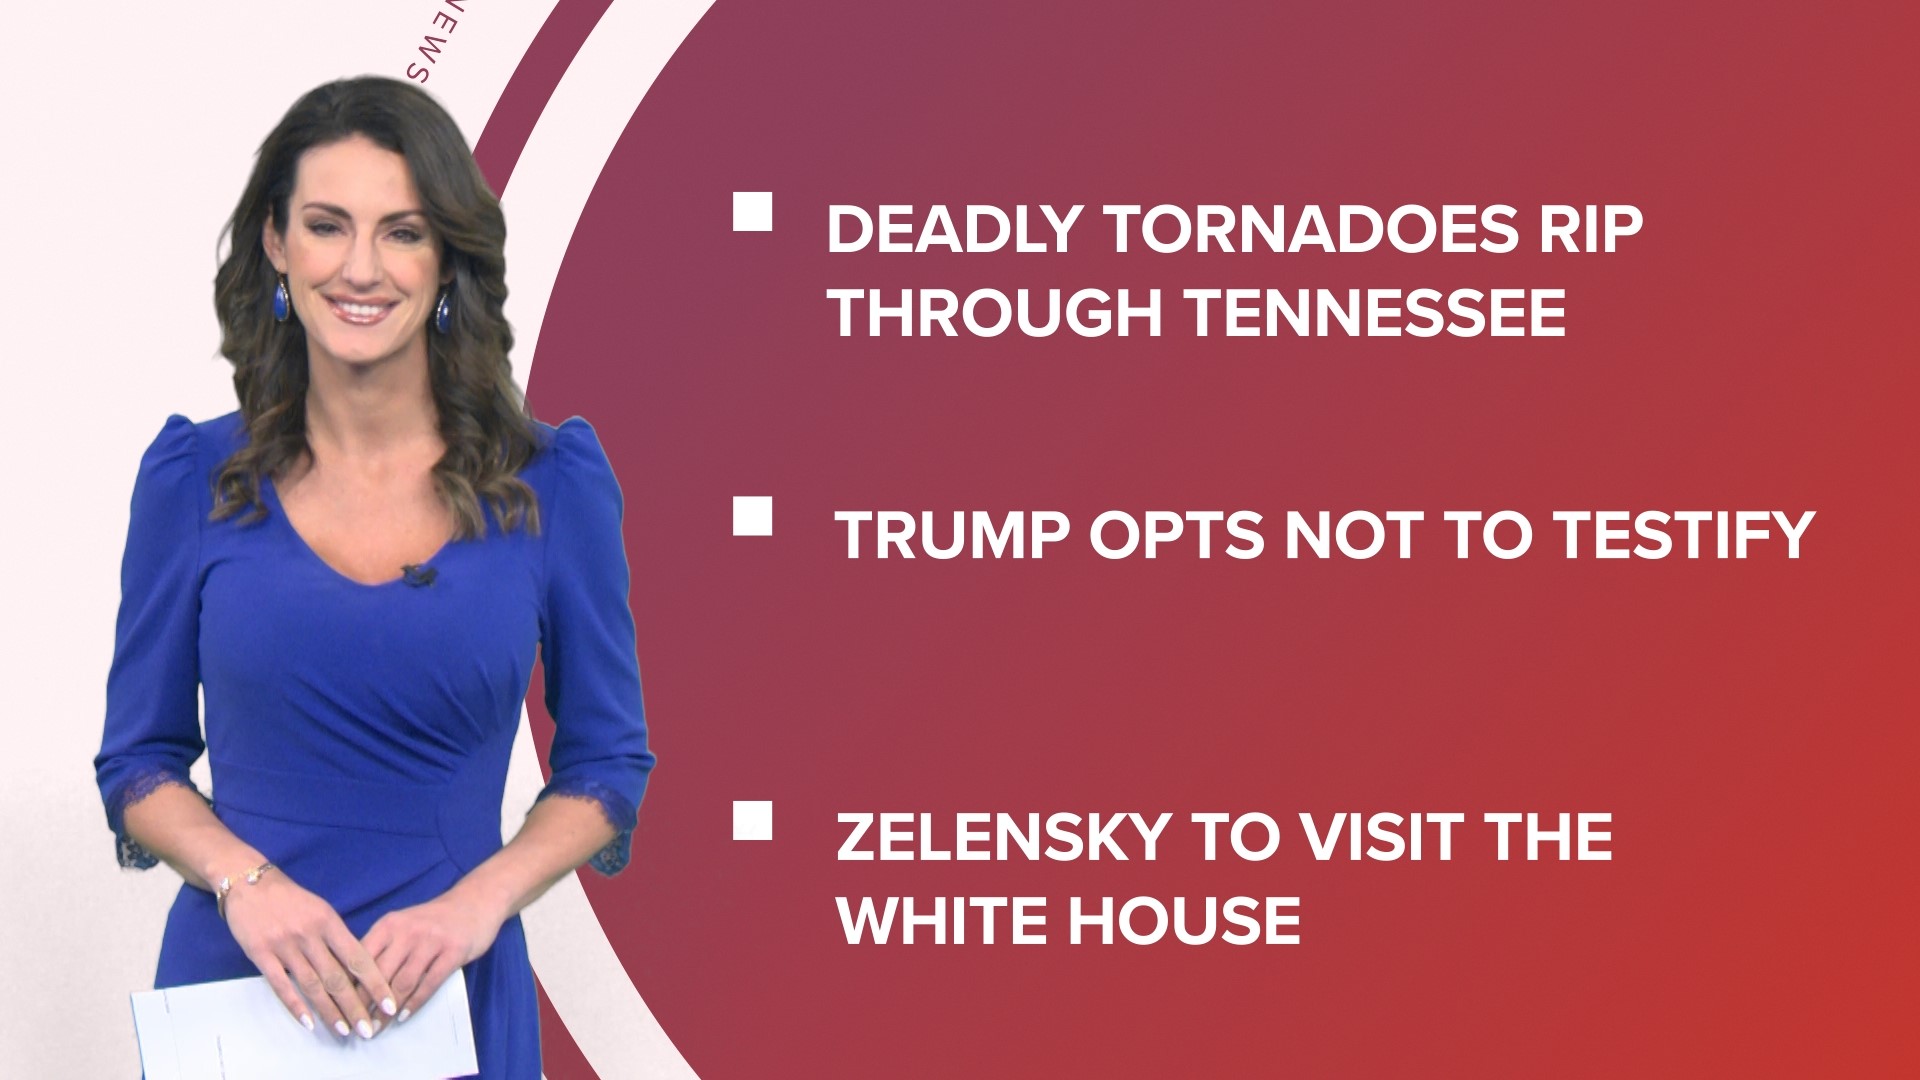 A look at what is happening in the news from deadly tornadoes in Tennessee to FDA approving new sickle cell disease treatment and protecting yourself from scammers.